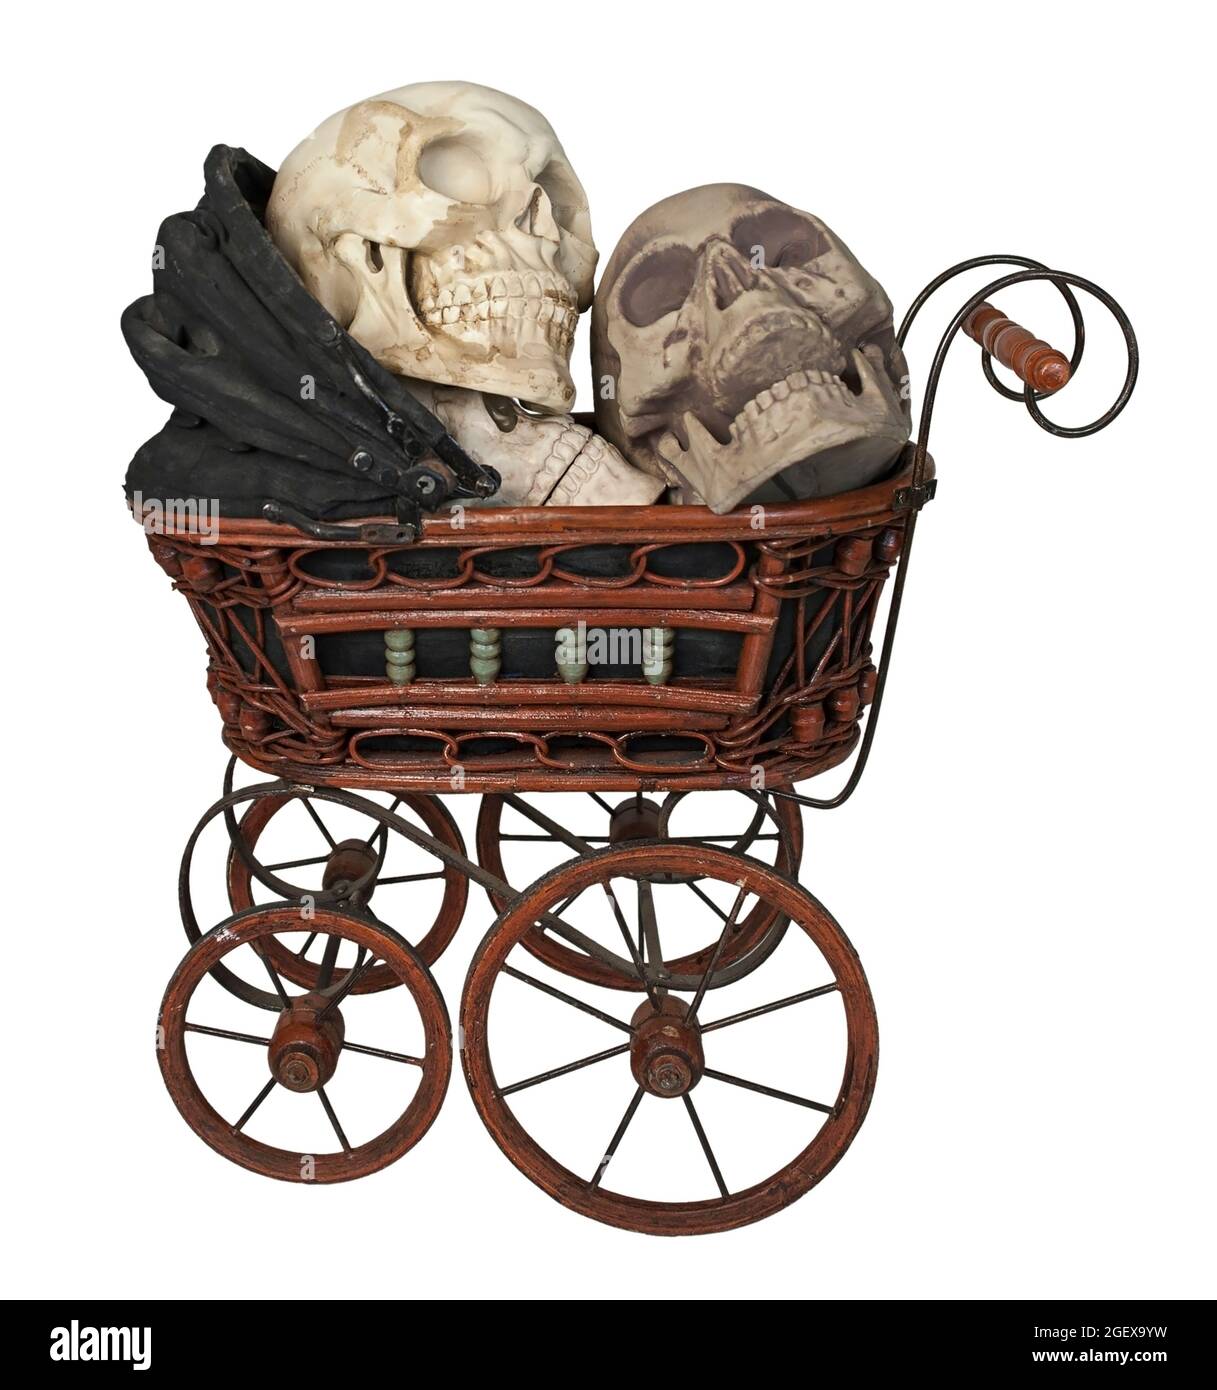 Black Bassinet full of Skulls with eye sockets and teeth - path included Stock Photo